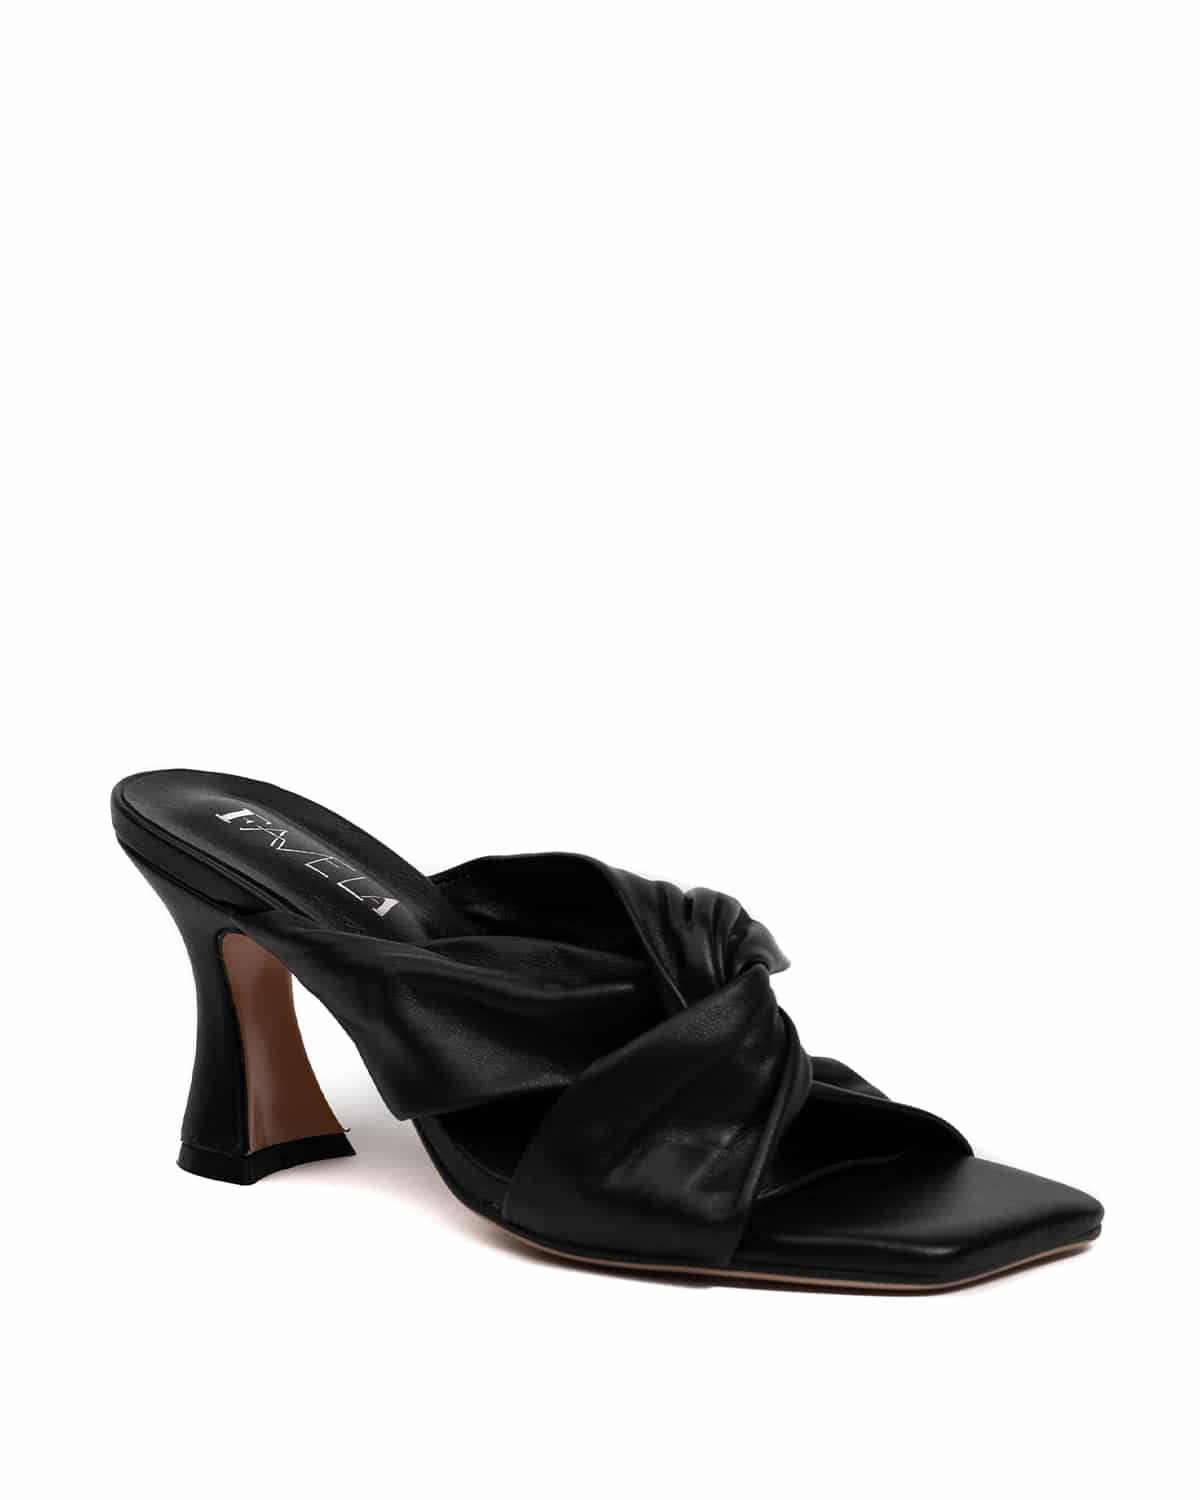 Mule-style pump - Anna shoes & more